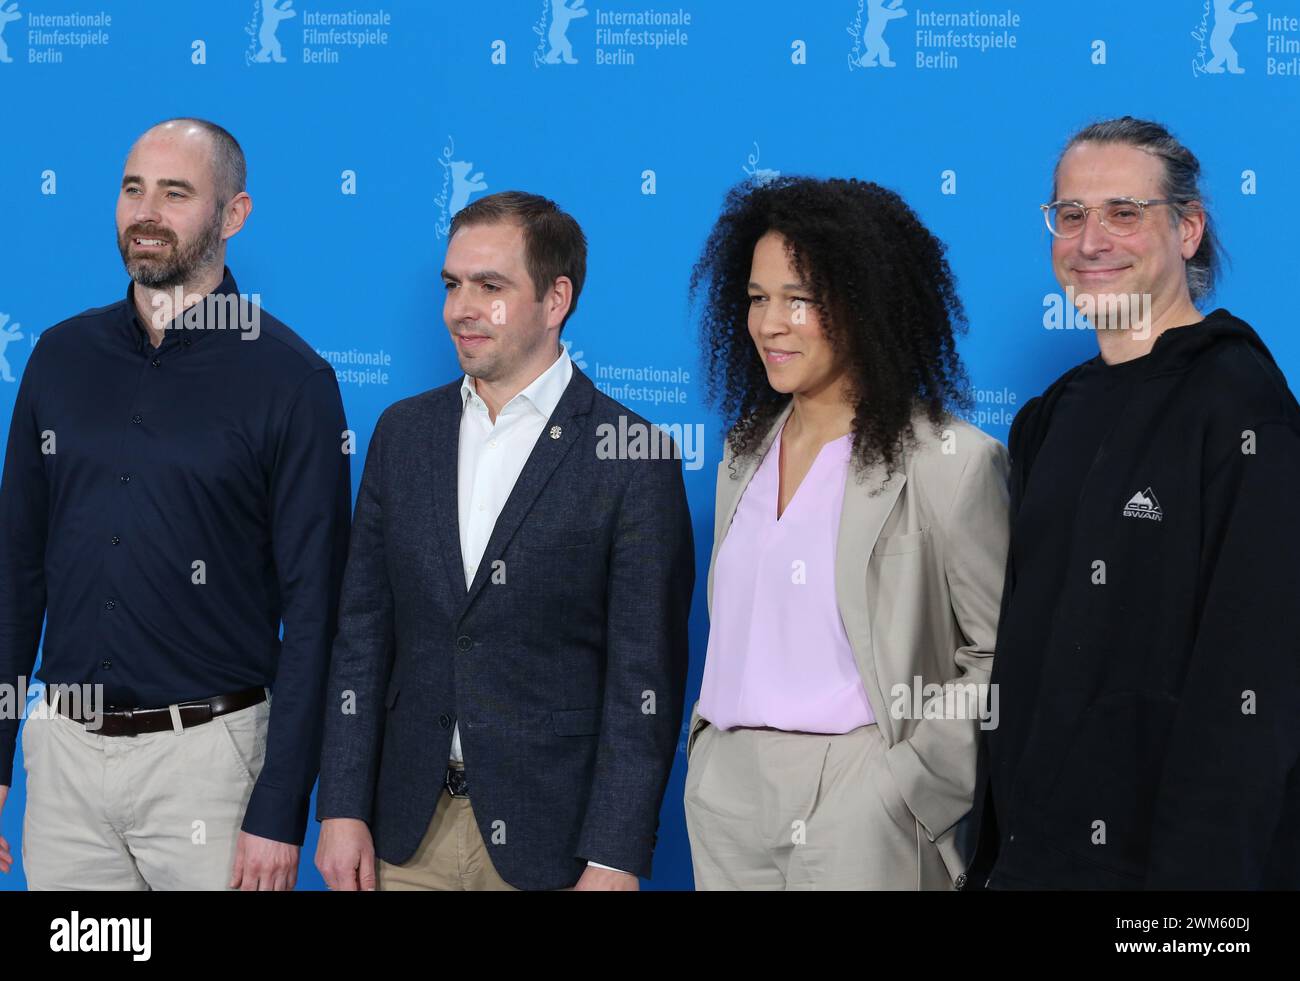 Berlin, Germany, 21st February 2024, Tim Frohwein, Philipp Lahm, Celia Šašić and Sadek Asseily at the photo call for Elf Mal Morgen: Berlinale Meets Fußball (Eleven Tomorrows: Berlinale Meets Football), eleven short documentaries have been commissioned about eleven different youth football teams, at the 74th Berlinale International Film Festival. Photo Credit: Doreen Kennedy / Alamy Live News. Stock Photo